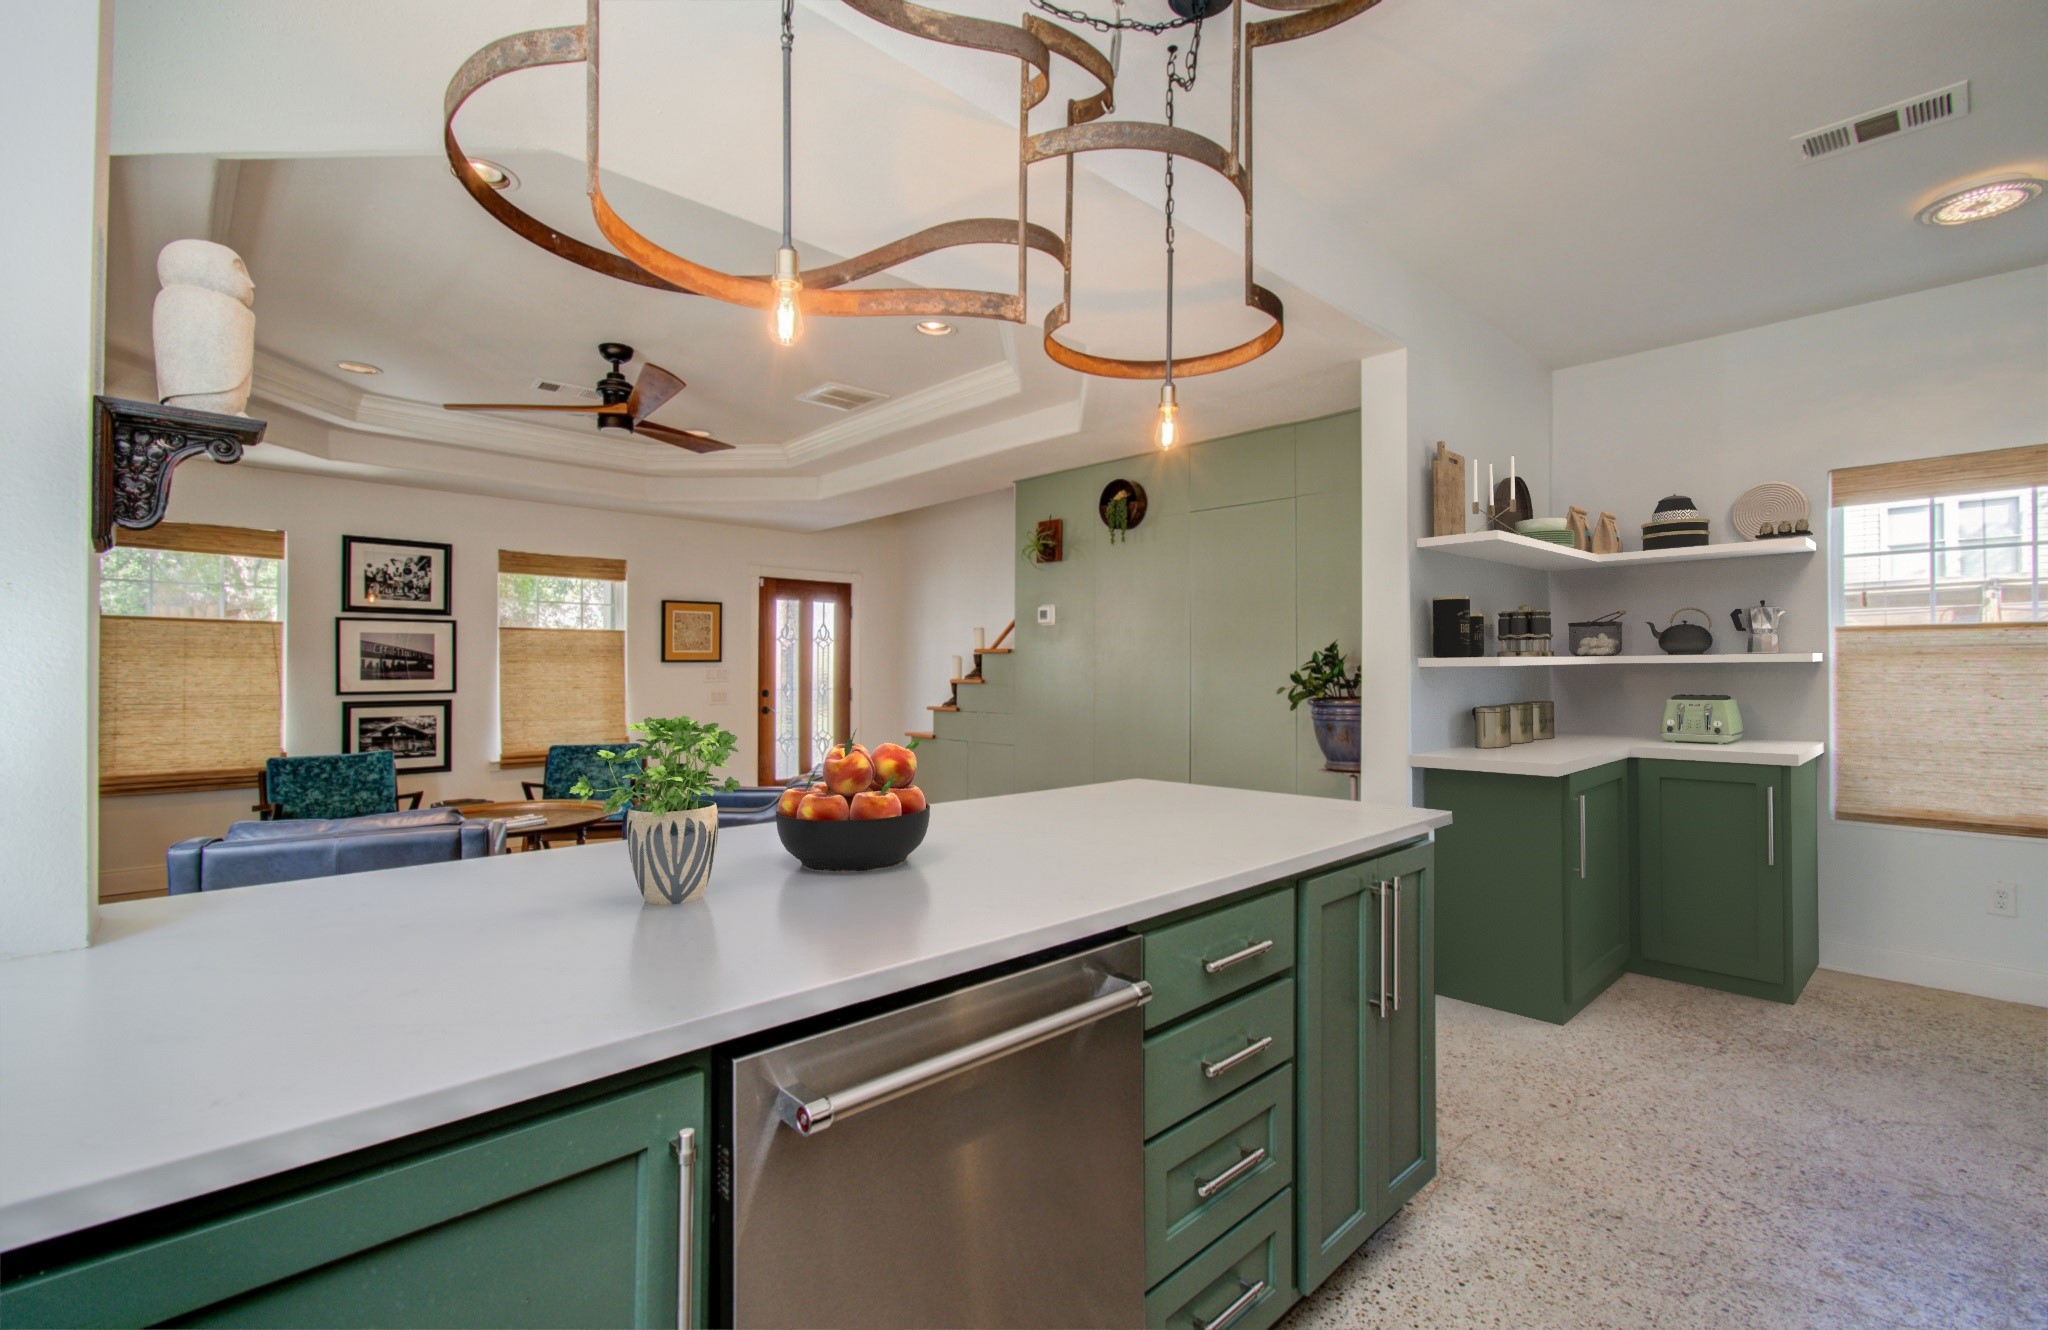 Explore the Potential: This kitchen photo features virtual staging on the right to showcase additional cabinet space possibilities.